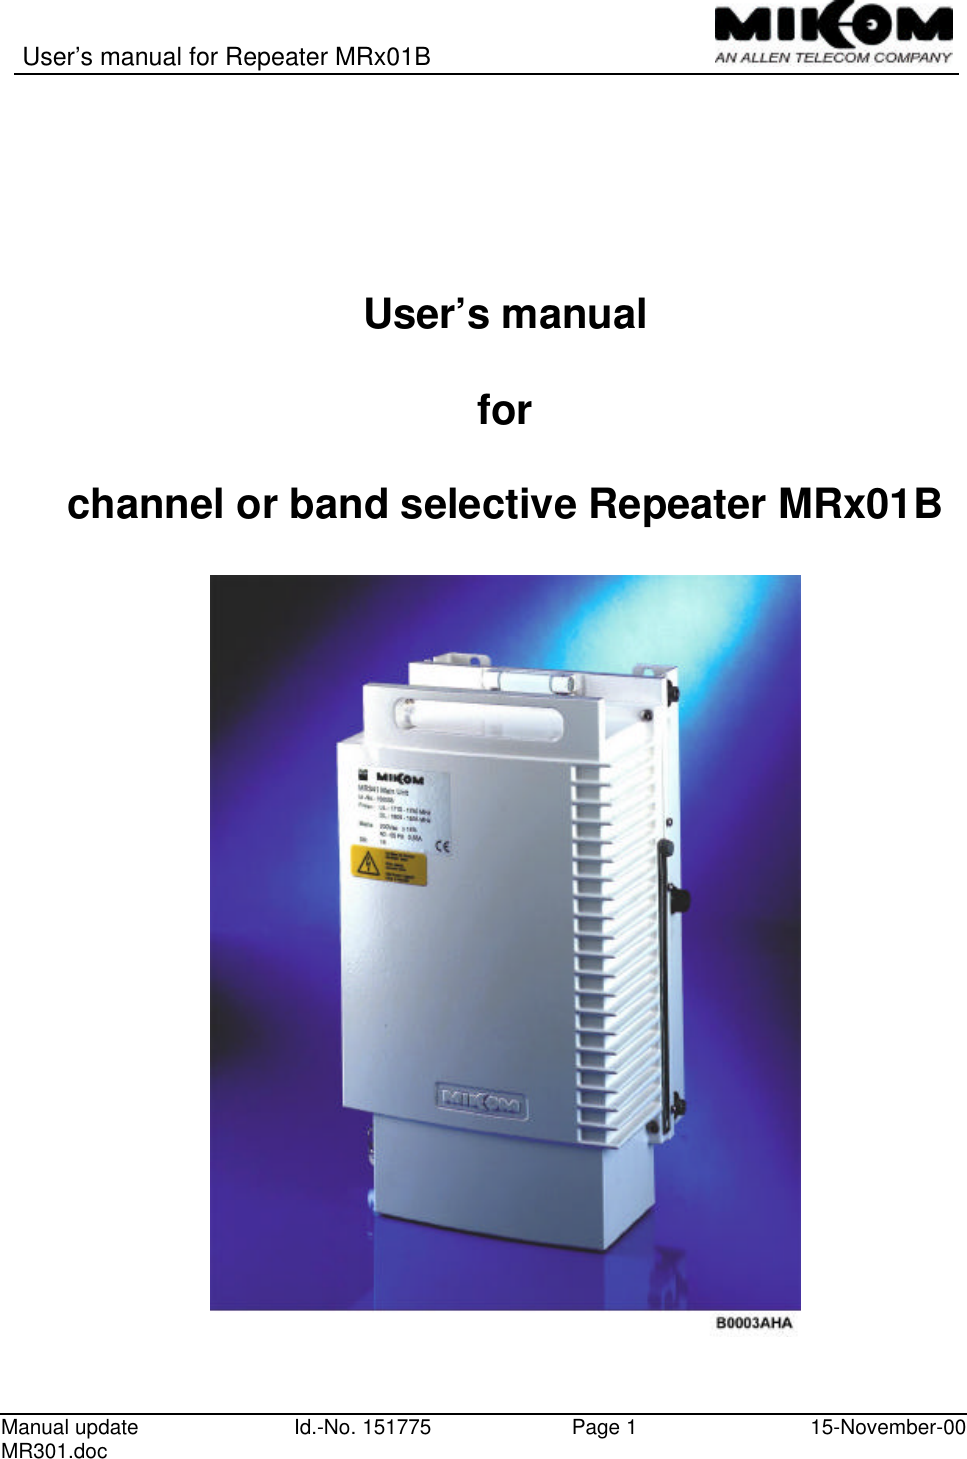 User’s manual for Repeater MRx01BManual updateMR301.doc Id.-No. 151775 Page 115-November-00User’s manualforchannel or band selective Repeater MRx01B